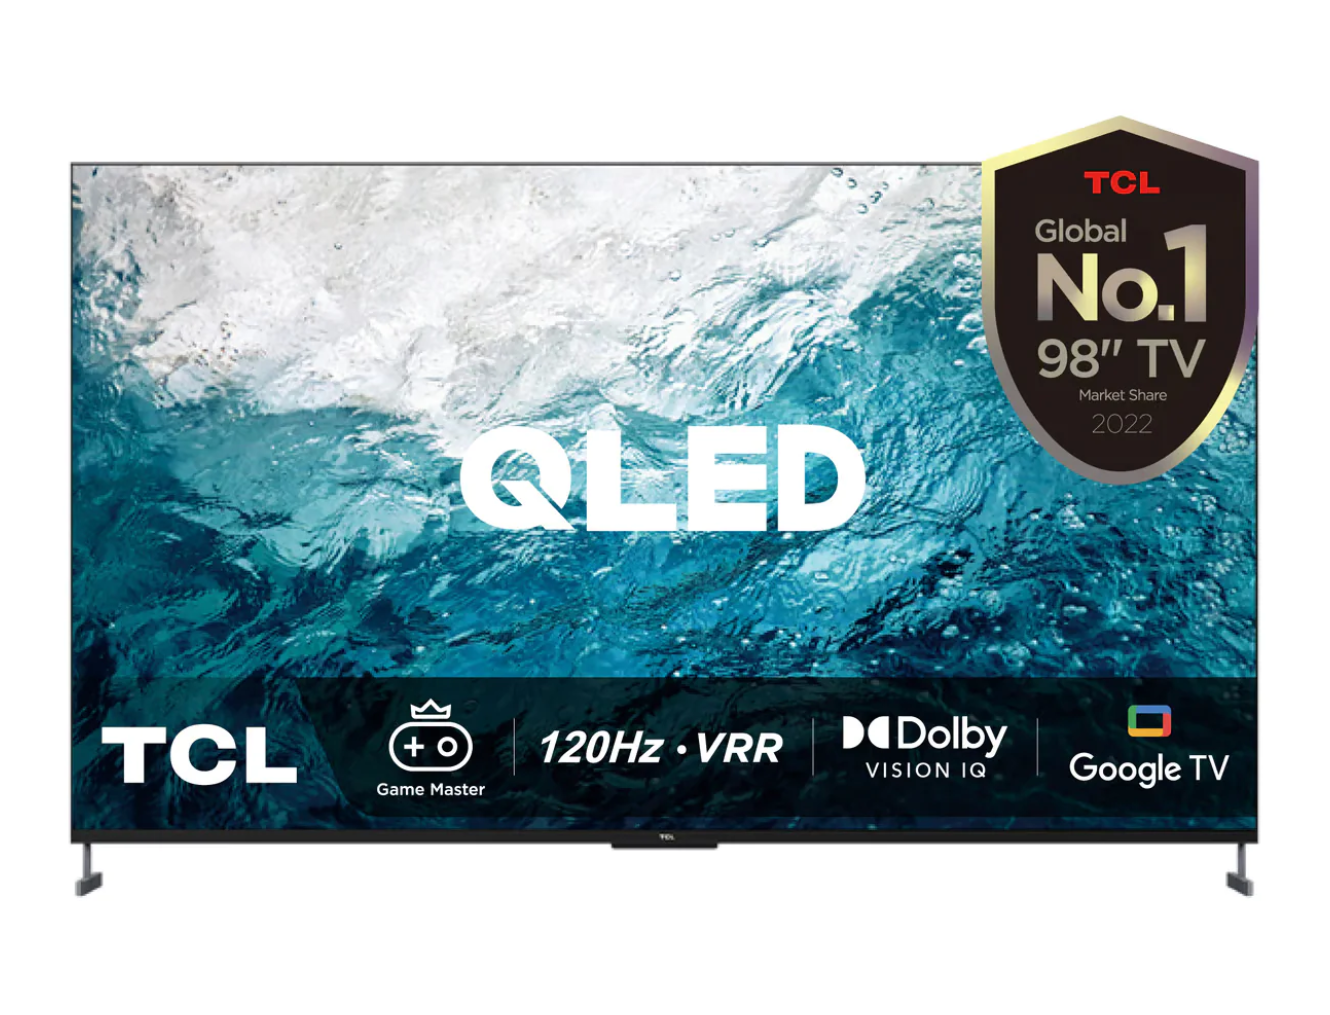 TCL 98 Inch QLED 4K Smart Tv Ultra HD, Google TV, 120Hz Game Accelerator, ONKYO Dolby Atmos and DTS with 3D sound  98C735